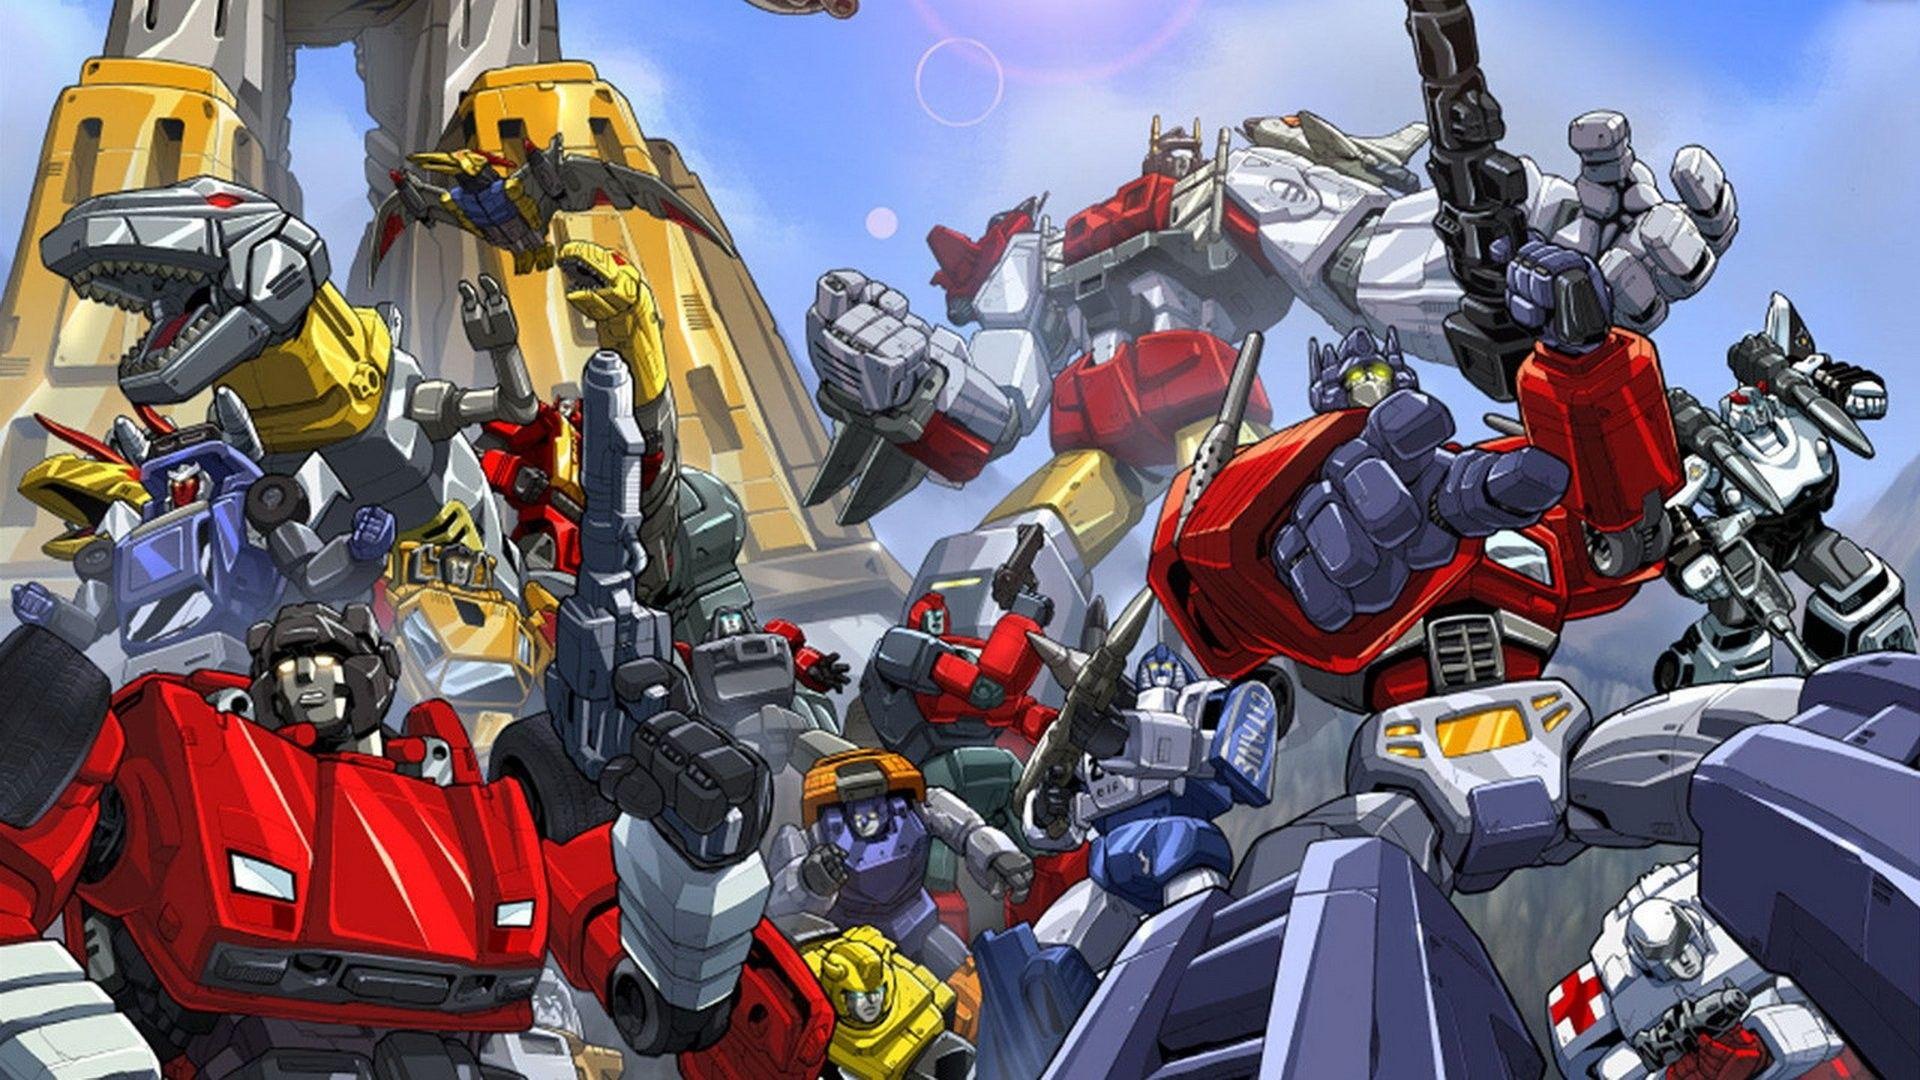 Transformers G1 Wallpapers 49+.